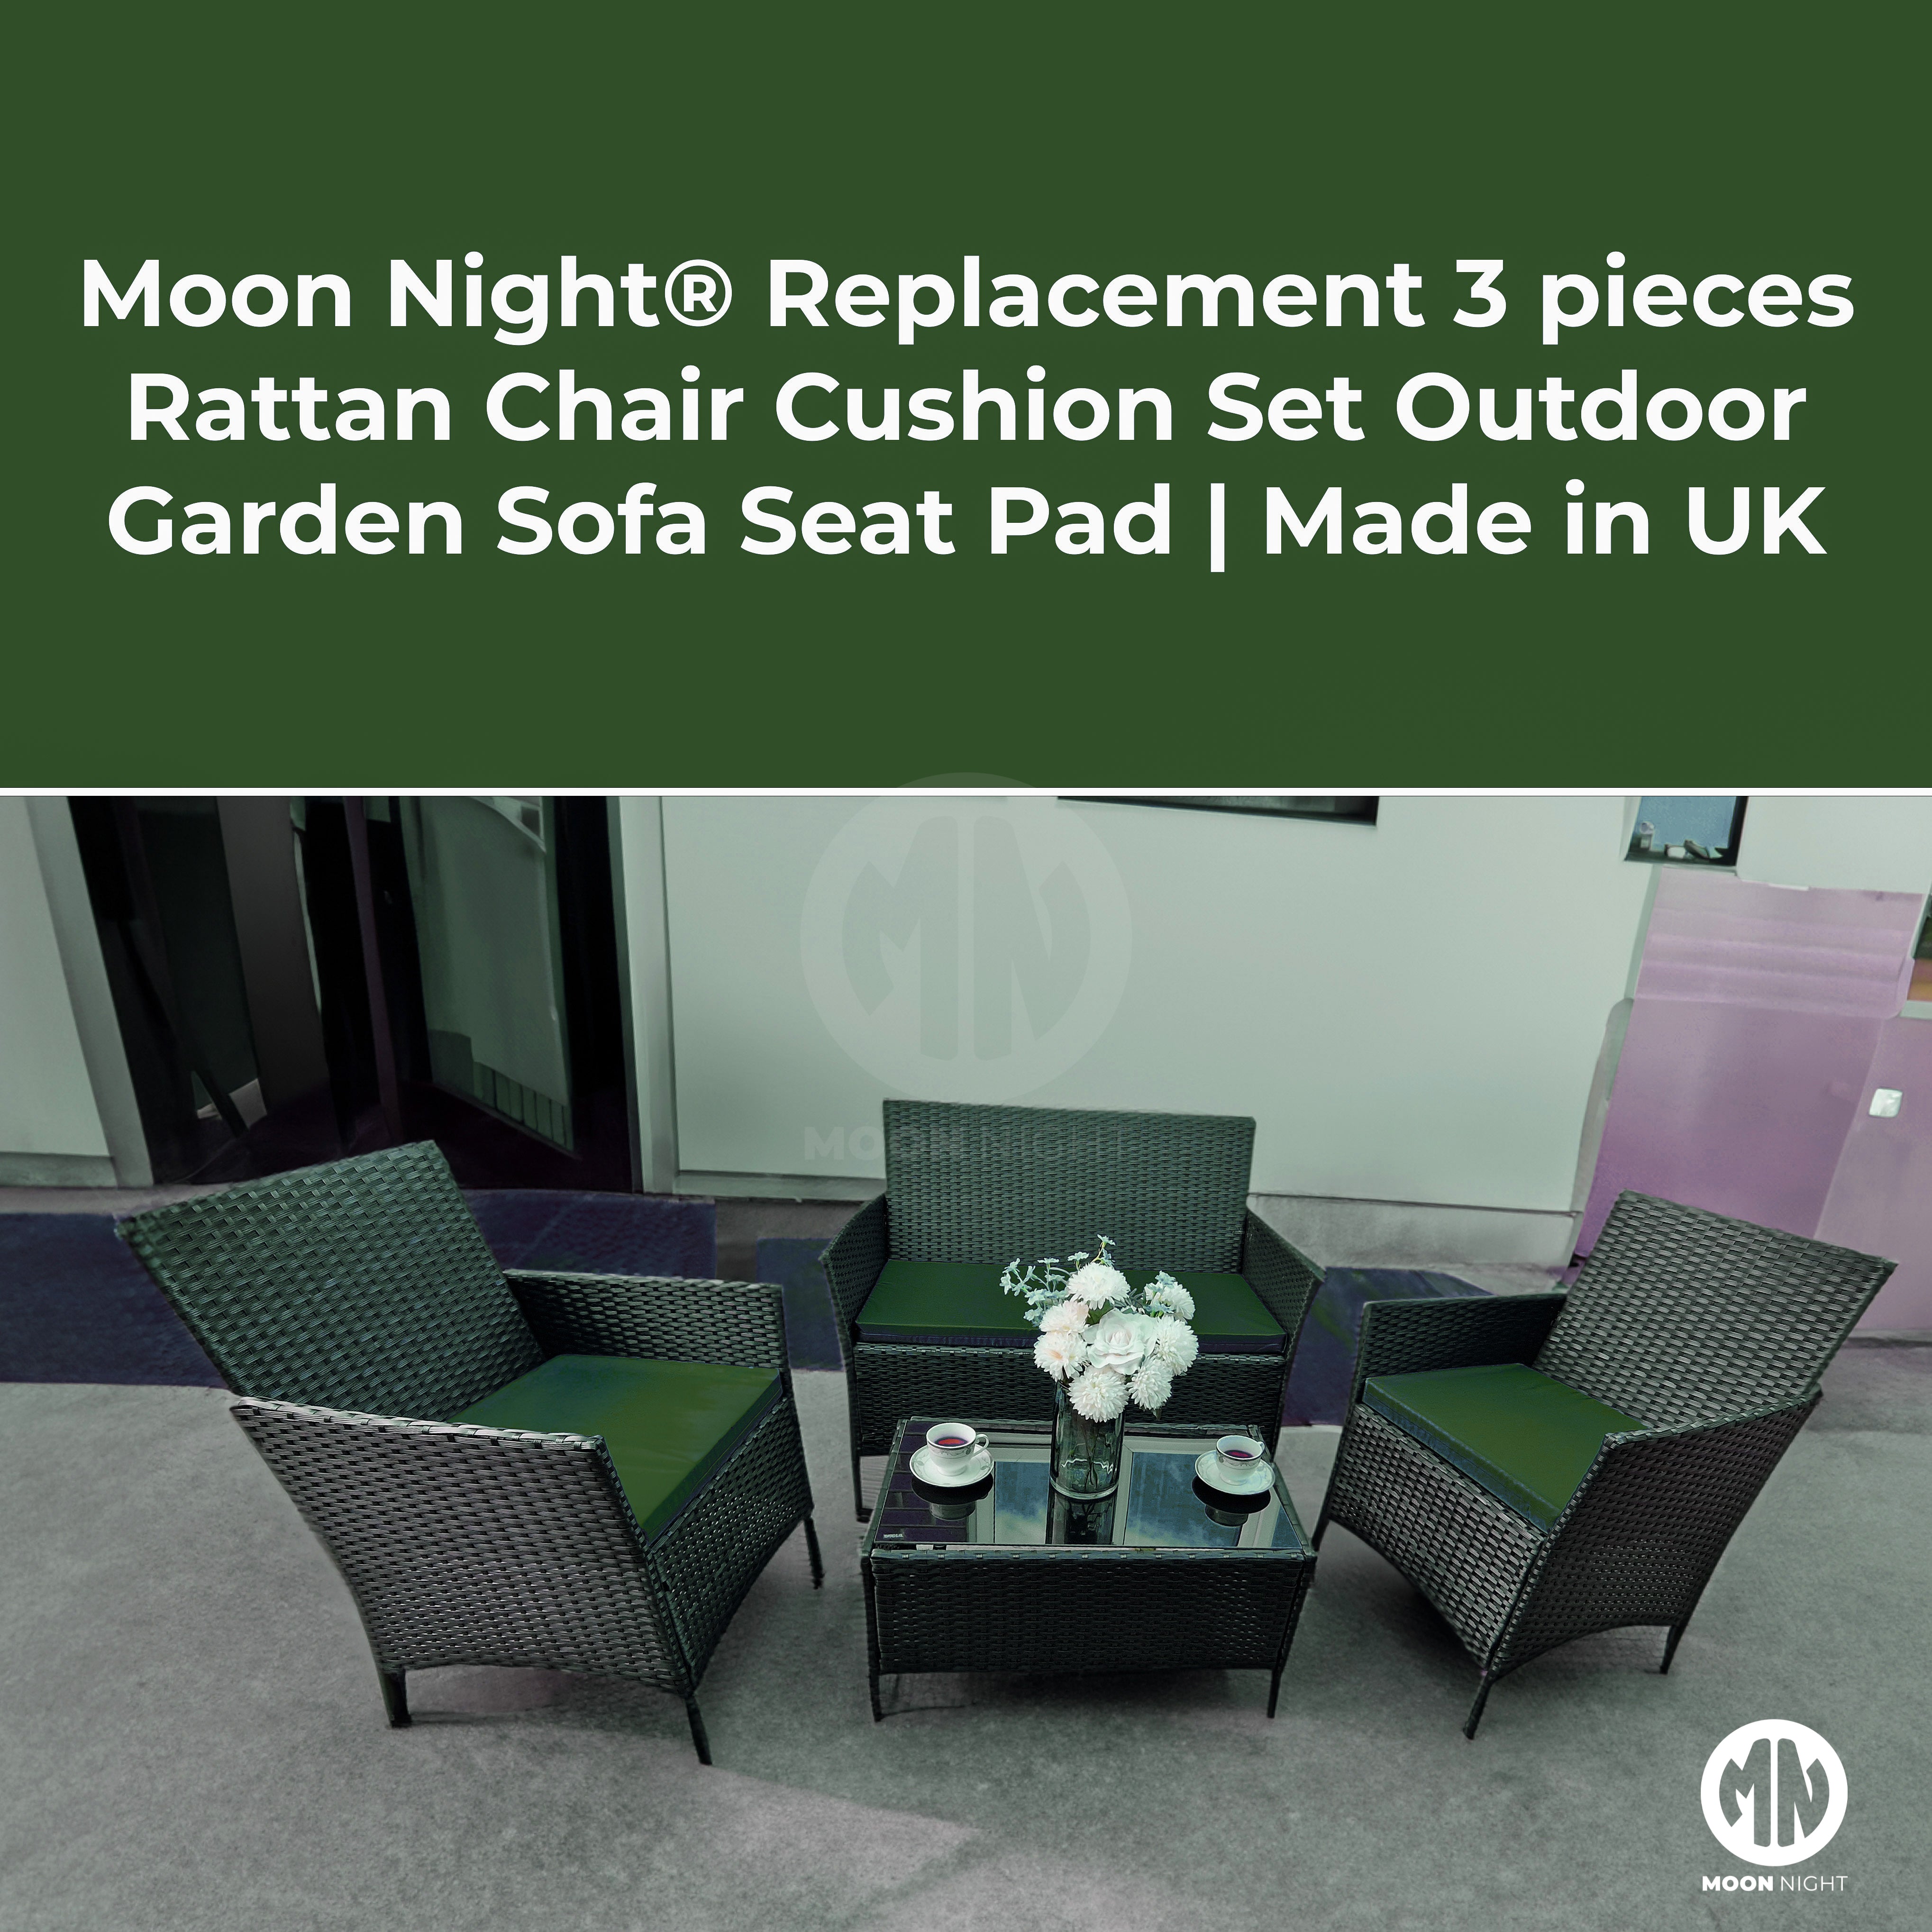 Moon Night® Replacement 3 pieces Rattan Chair Cushion Set Outdoor Garden Sofa Seat Pad [Made in UK]- Bottle Green